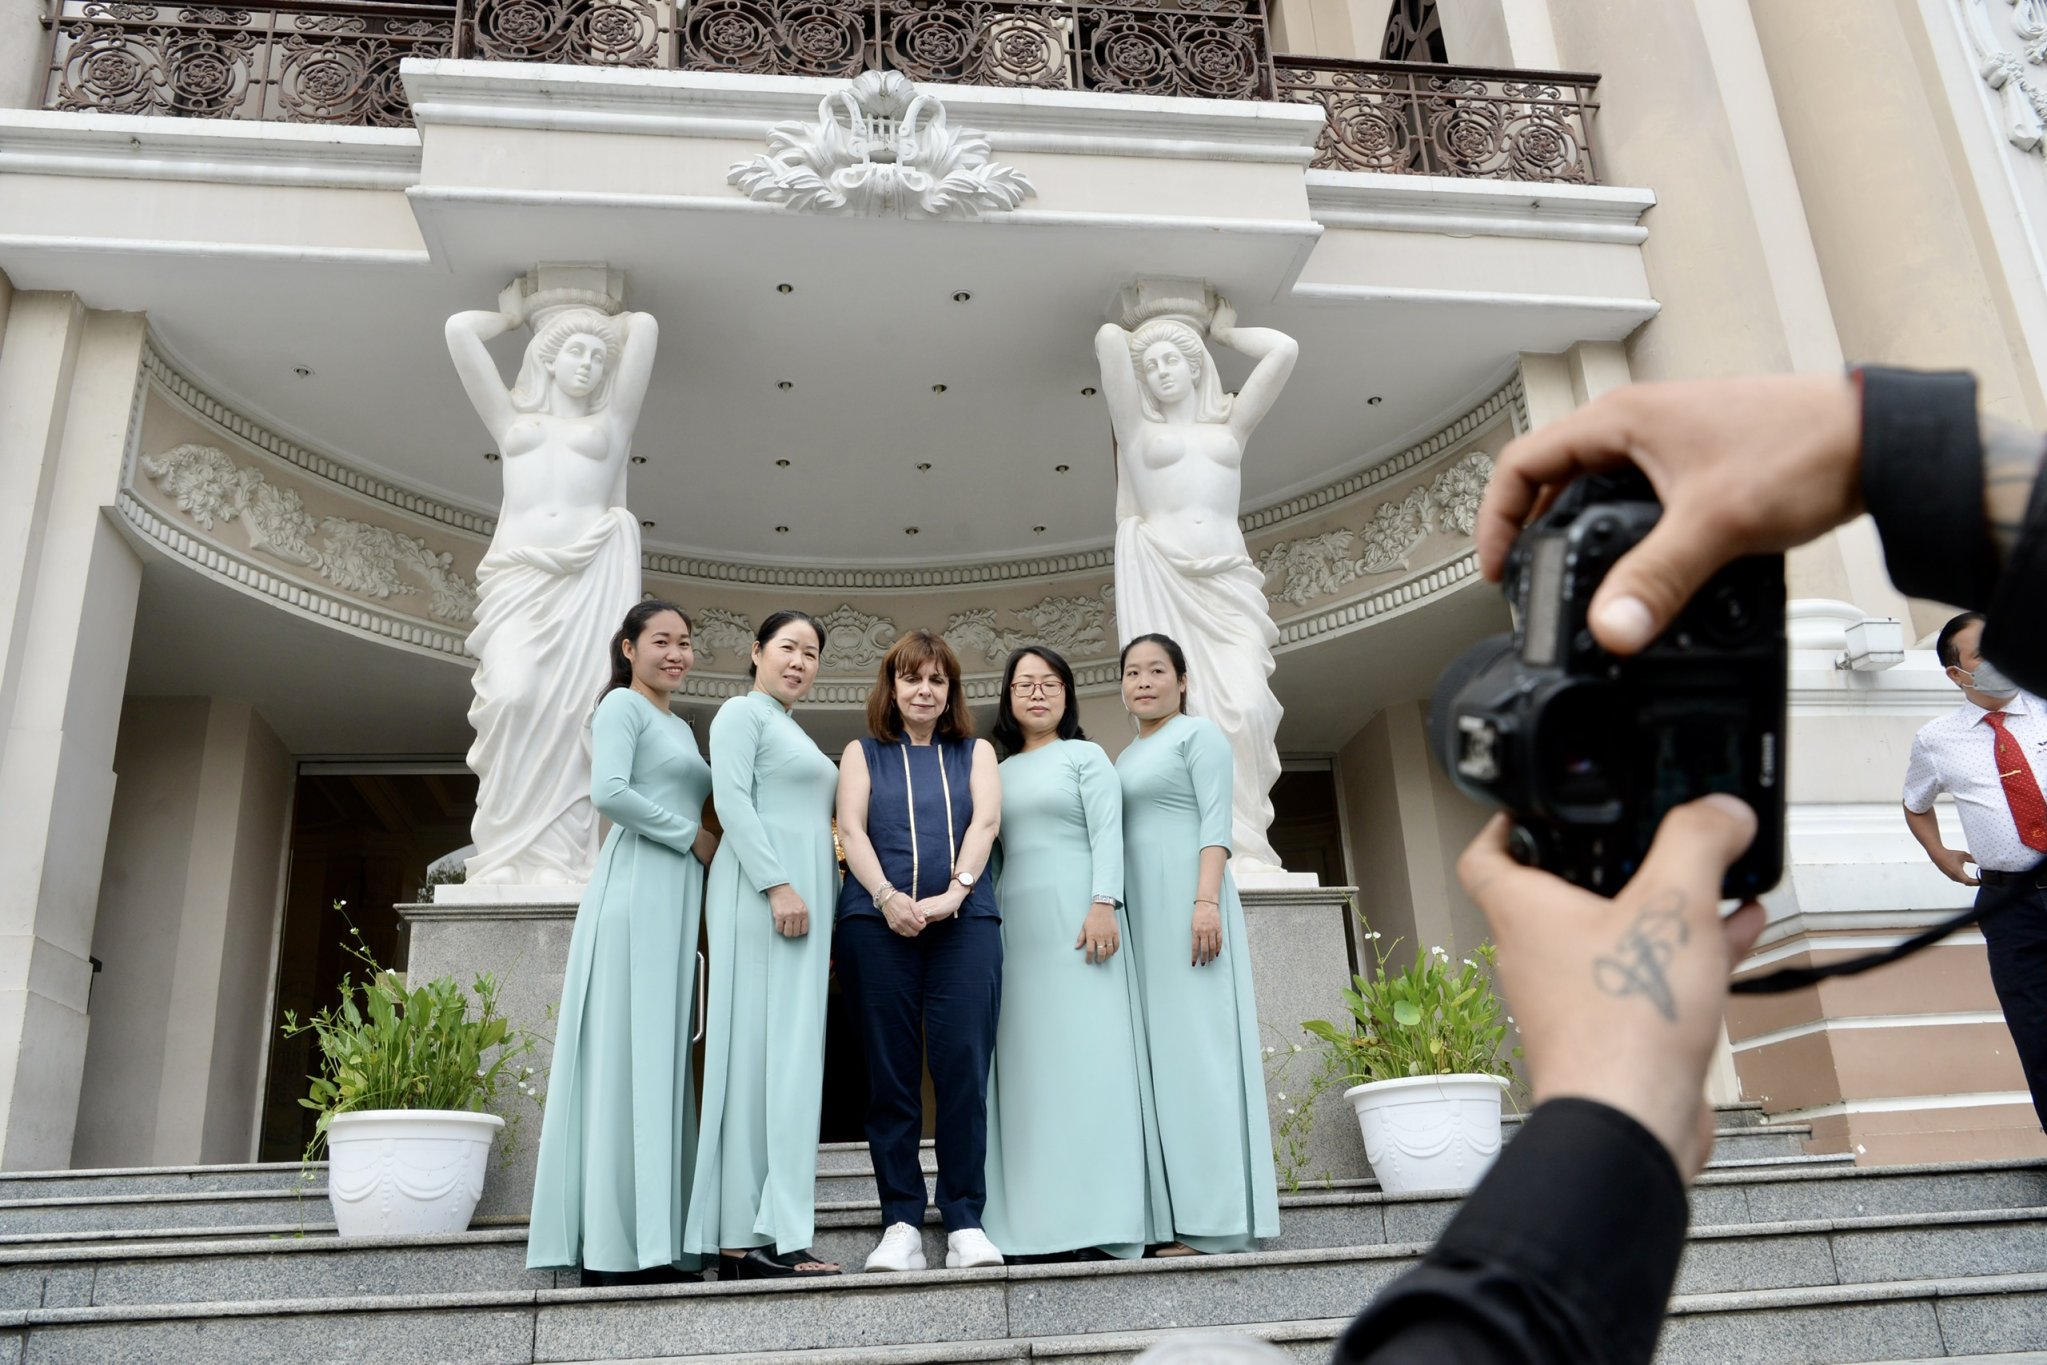 Greek President Katerina Sakellaropoulou poses for a photo with female employees of the Municipal Theater in Ho Chi Minh City, May 19, 2022. Photo: T.T.D. / Tuoi Tre